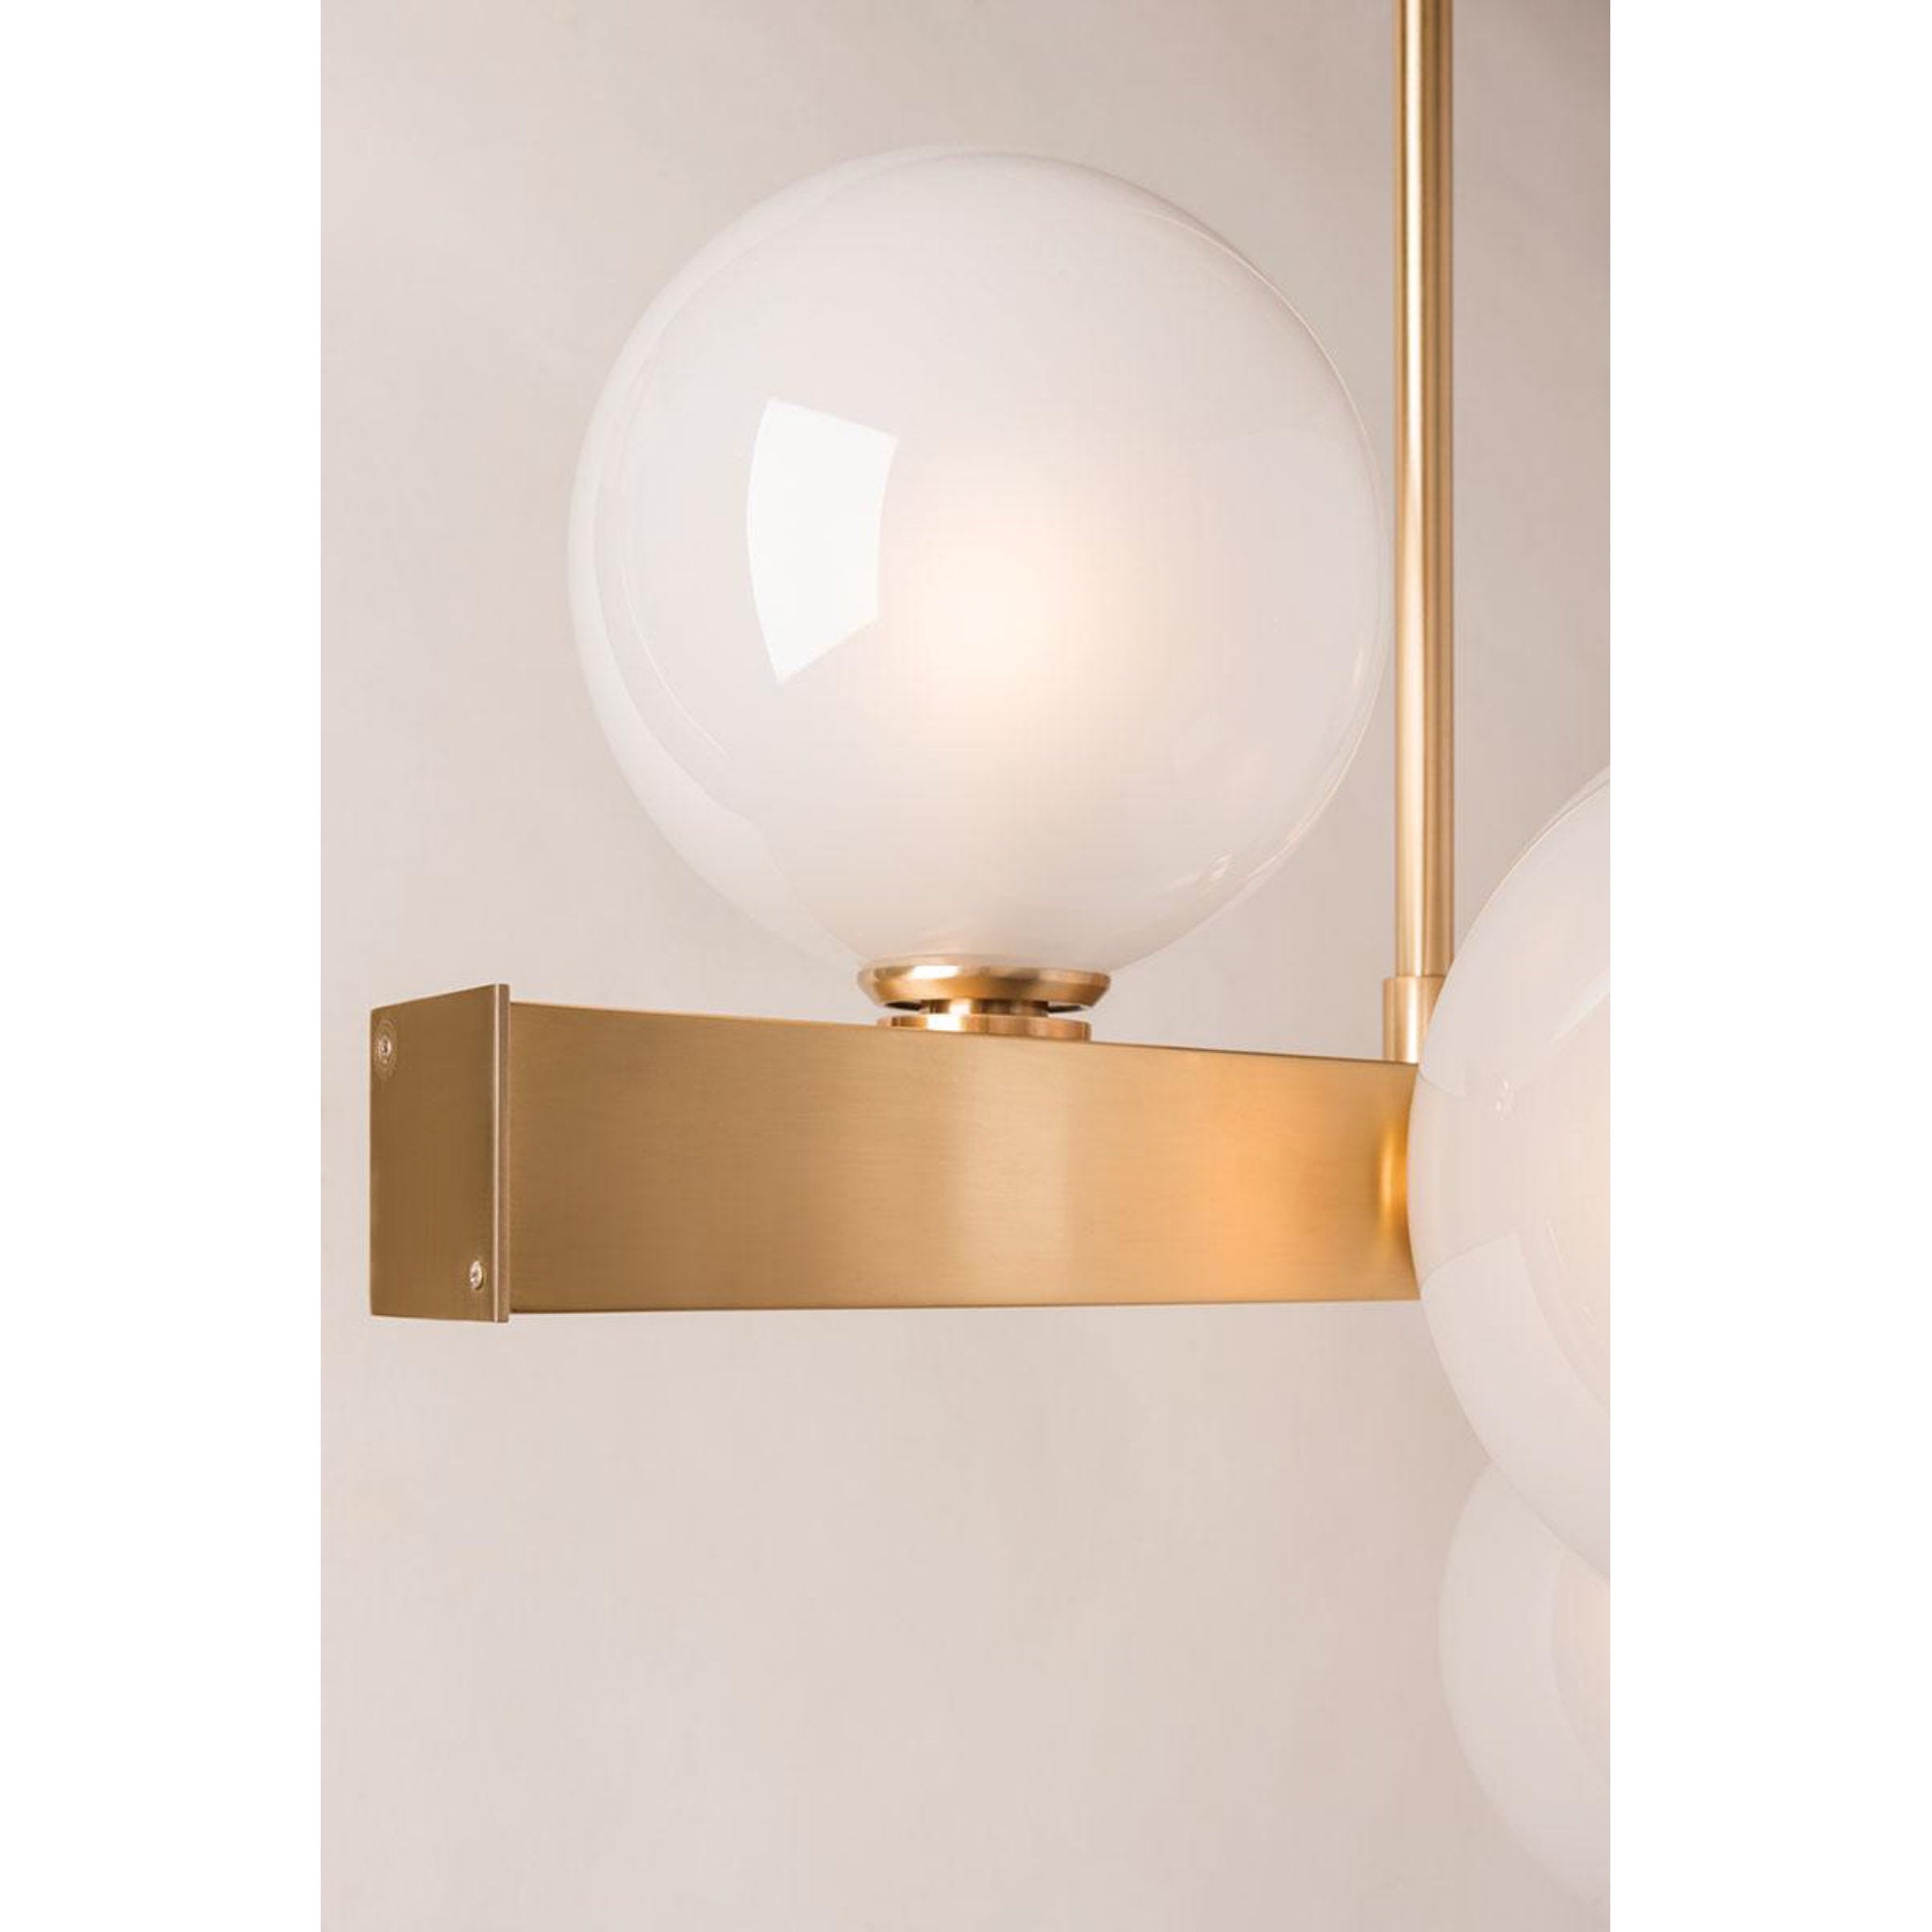 Hinsdale 1 Light Wall Sconce in Polished Nickel